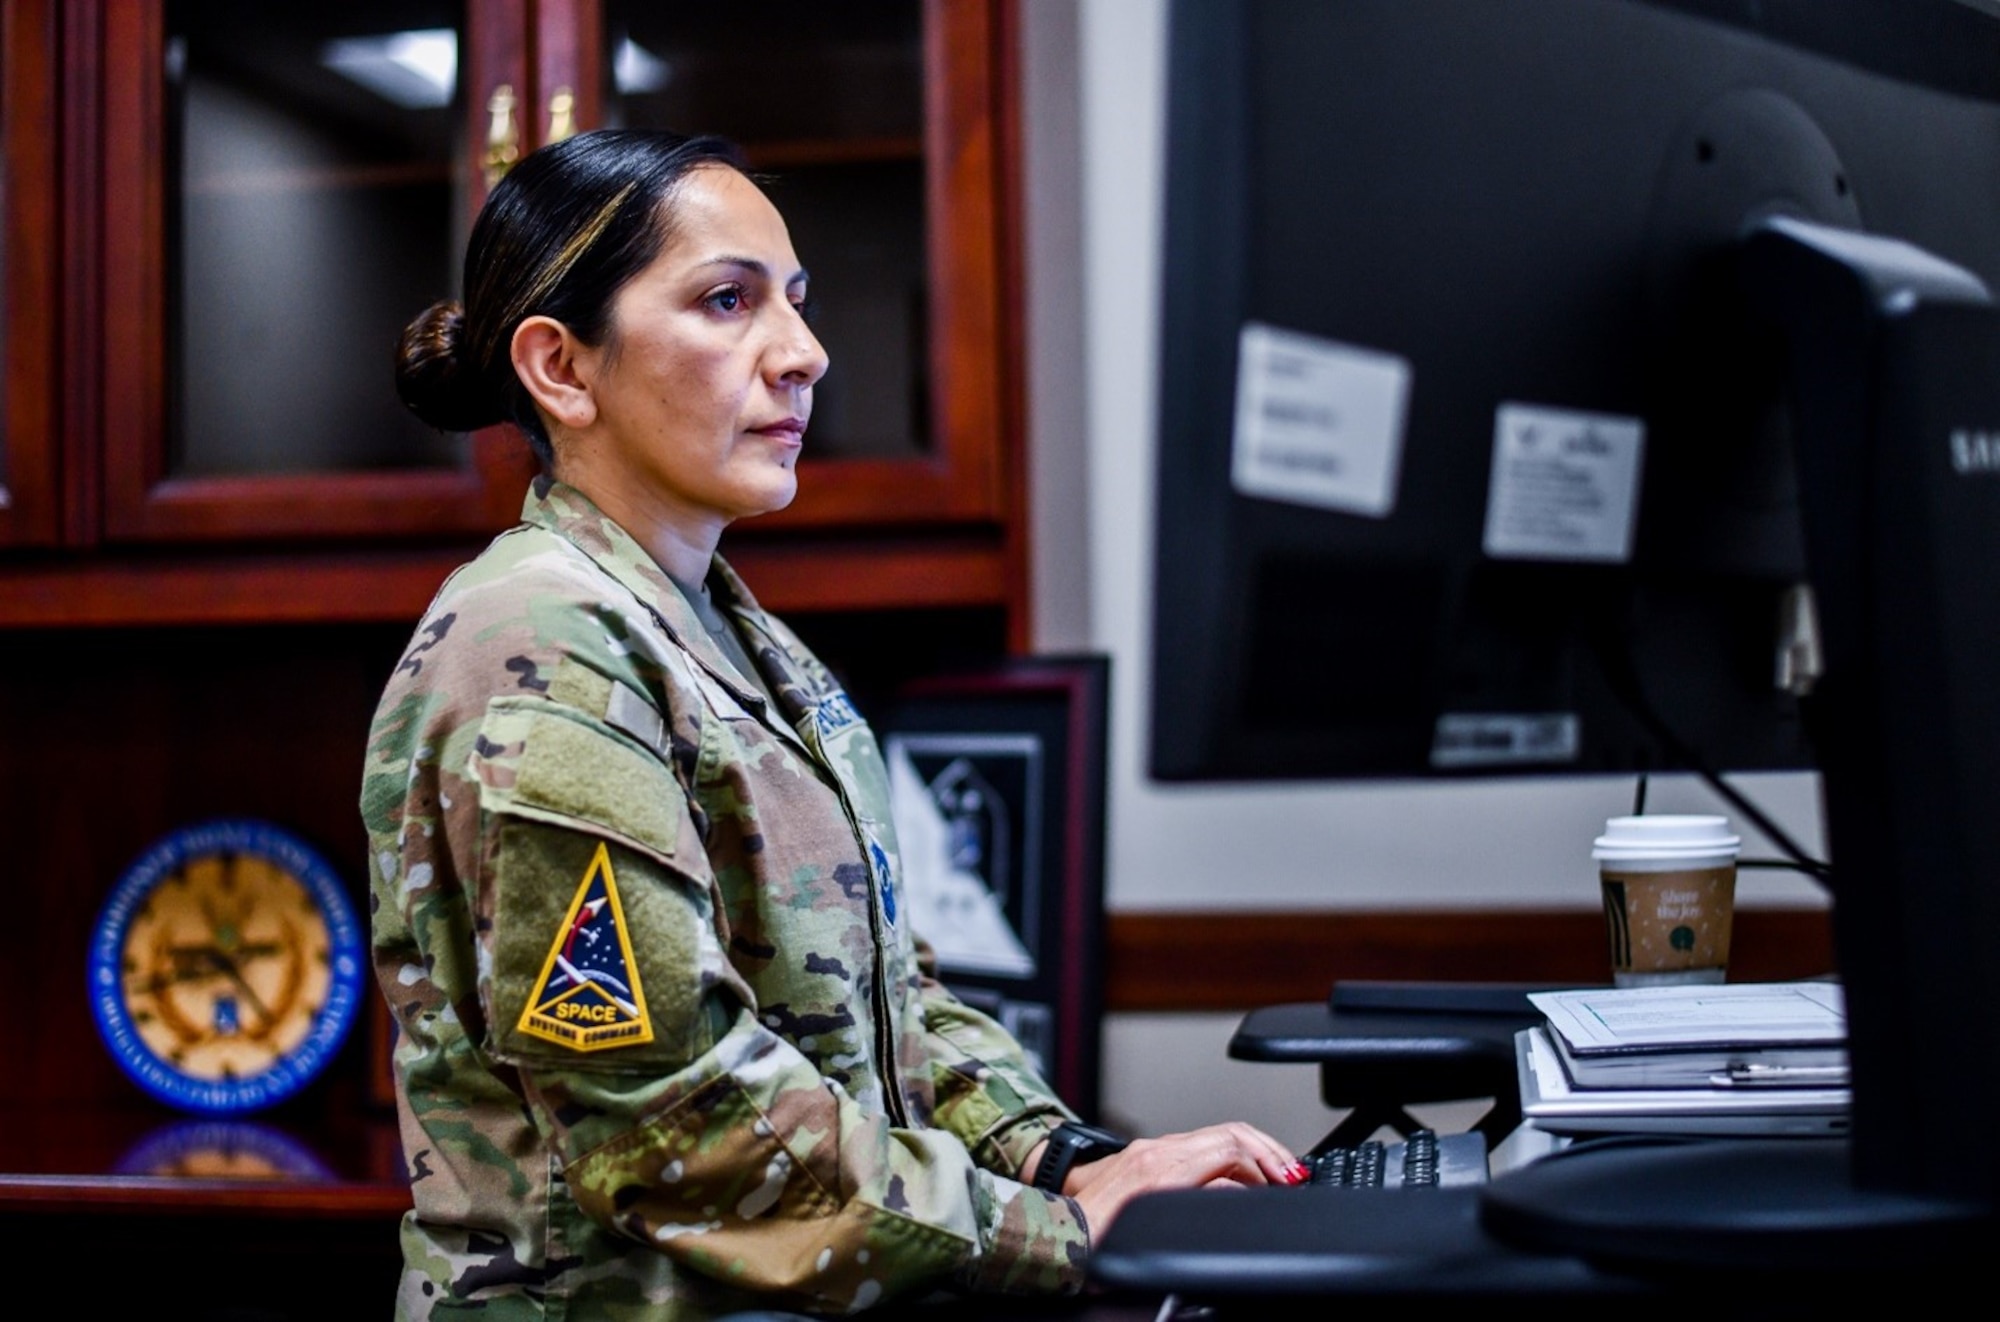 Chief Master Sgt. Jacqueline Sauvé, Space Systems Command’s new senior enlisted leader, works at her desk inside SSC headquarters on Los Angeles Air force Base in El Segundo, Calif. As the Senior Enlisted Leaser to the SSC Commander, Sauvé serves as an advisor on all matters of professional development, work force utilization, military readiness, morale, welfare and mission effectiveness for a force of more than 15,000 personnel assigned to 29 geographically separated units. (U.S. Space Force photo by Van Ha)